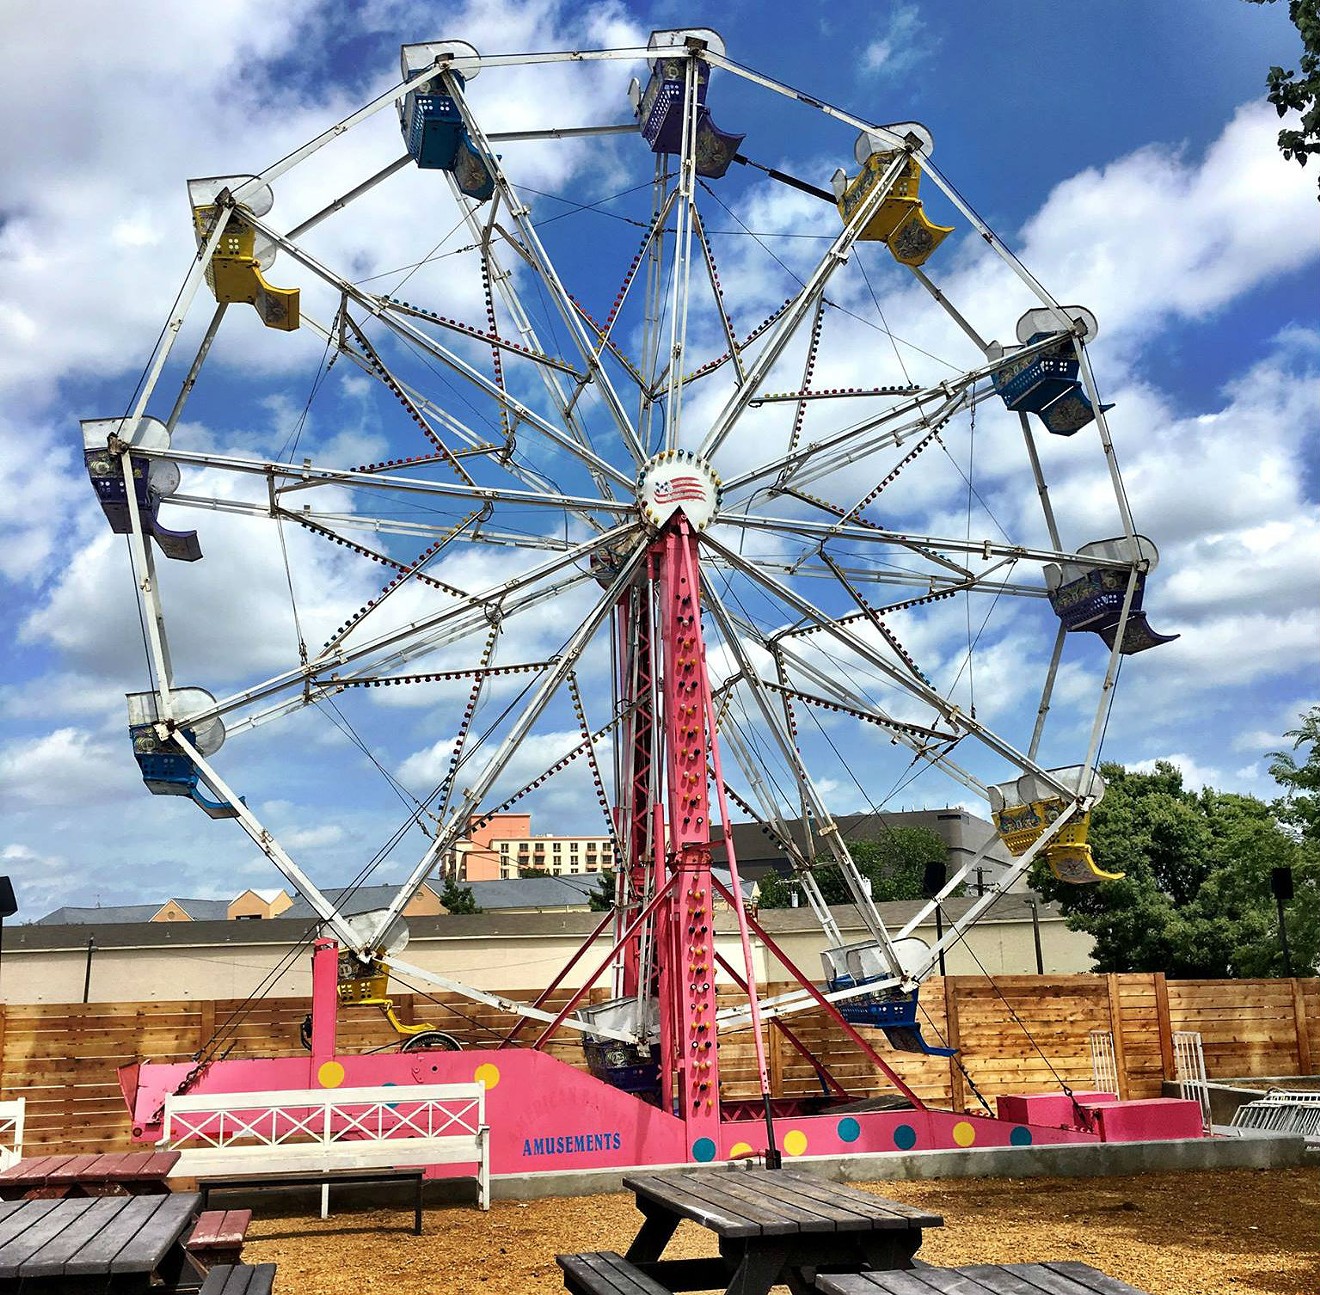 Yes, you can ride this 50-foot-tall Ferris wheel on Ferris Wheelers' 7,000-square-foot patio.